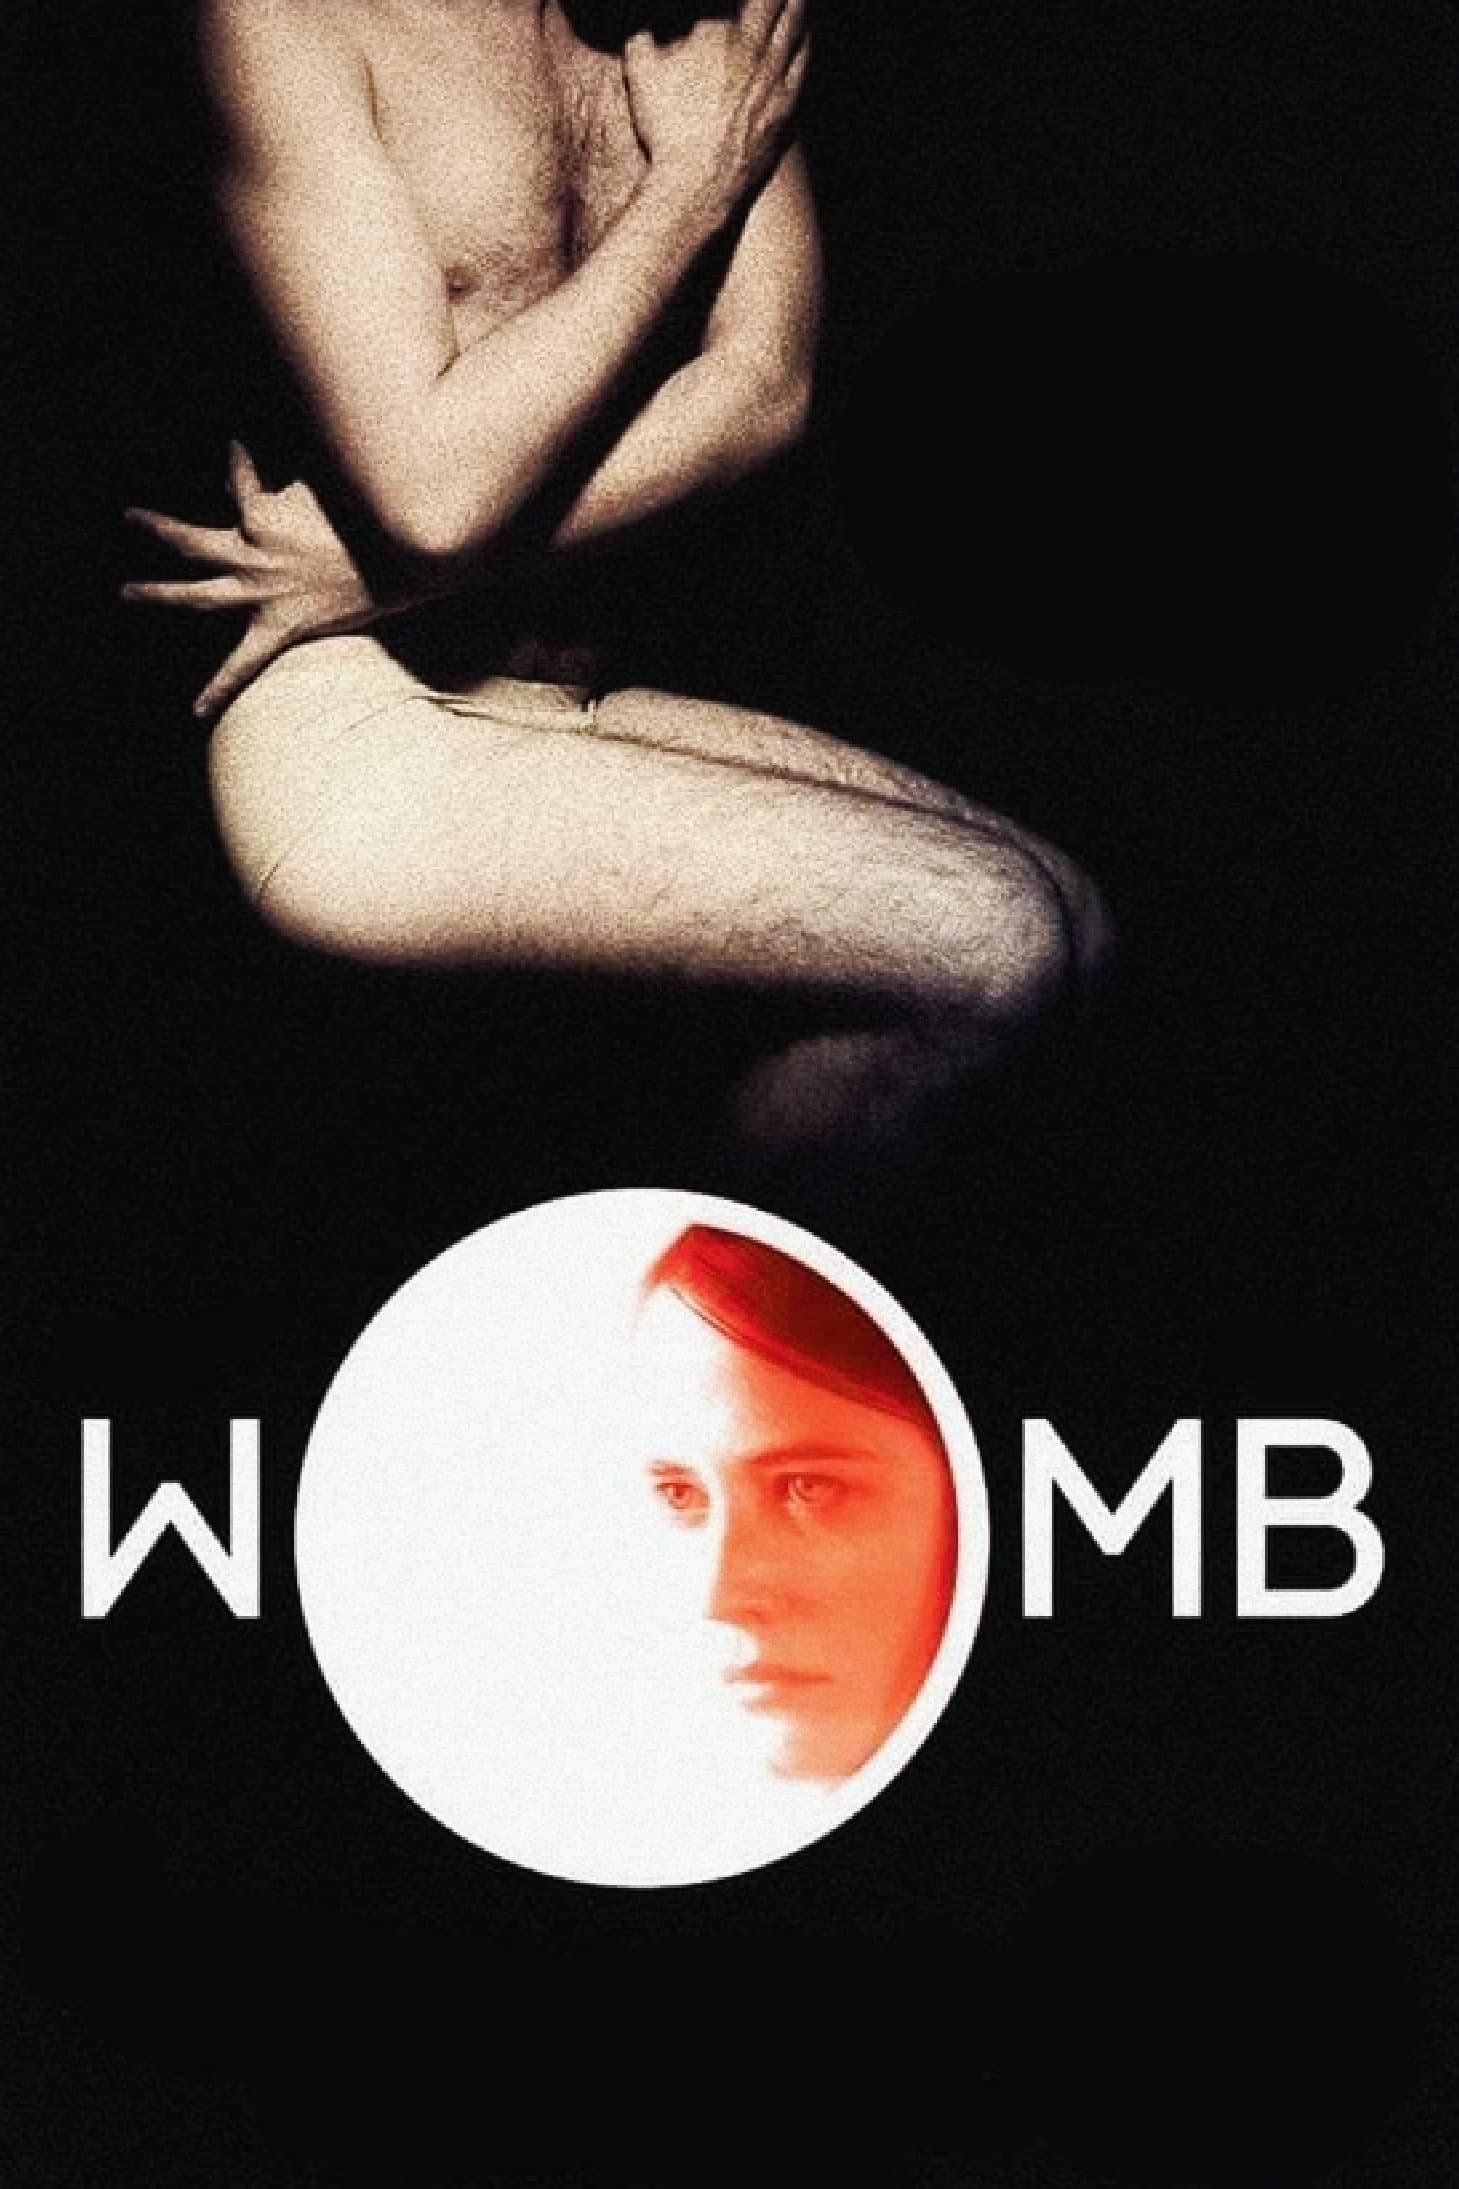 Womb poster